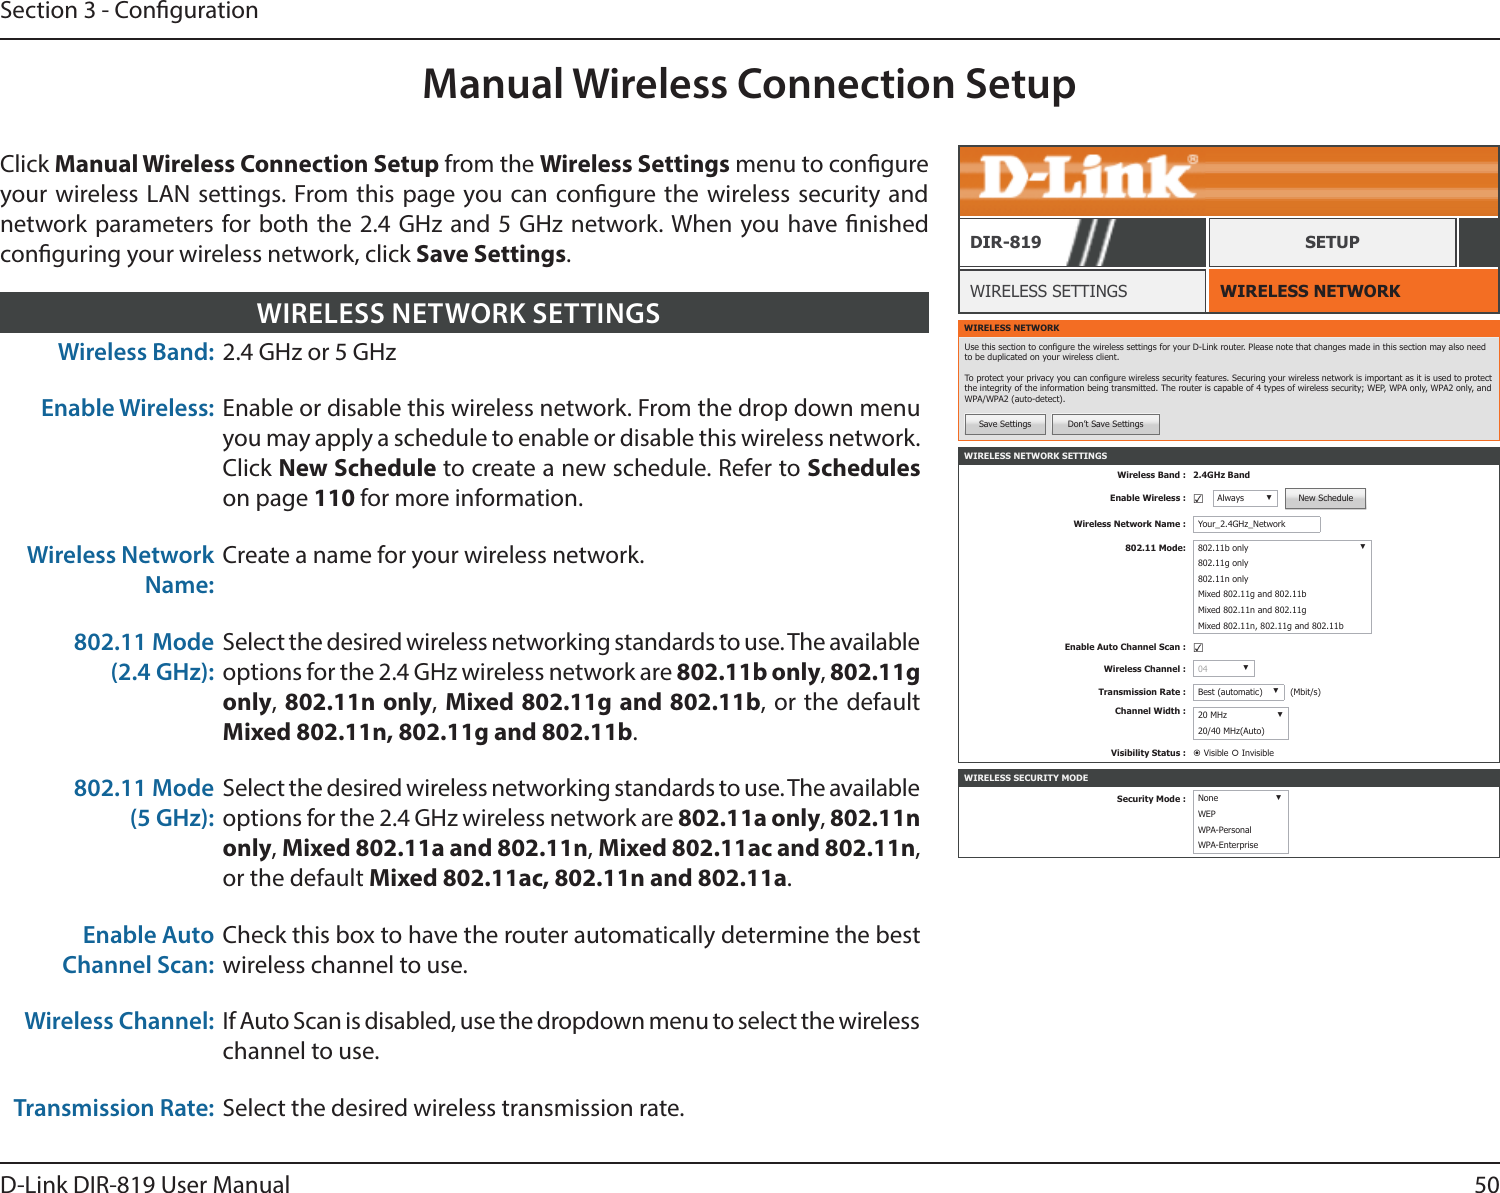 50D-Link DIR-819 User ManualSection 3 - CongurationManual Wireless Connection SetupWIRELESS NETWORK SETTINGSWireless Band : 2.4GHz BandEnable Wireless : ☑Always ▼New ScheduleWireless Network Name : Your_2.4GHz_Network802.11 Mode: 802.11b only ▼802.11g only802.11n onlyMixed 802.11g and 802.11bMixed 802.11n and 802.11gMixed 802.11n, 802.11g and 802.11bEnable Auto Channel Scan : ☑Wireless Channel : 04 ▼Transmission Rate : Best (automatic) ▼(Mbit/s)Channel Width : 20 MHz ▼20/40 MHz(Auto)Visibility Status :  Visible  InvisibleWIRELESS NETWORKWIRELESS SETTINGSDIR-819 SETUPWIRELESS NETWORKUse this section to congure the wireless settings for your D-Link router. Please note that changes made in this section may also need to be duplicated on your wireless client.To protect your privacy you can congure wireless security features. Securing your wireless network is important as it is used to protect the integrity of the information being transmitted. The router is capable of 4 types of wireless security; WEP, WPA only, WPA2 only, and WPA/WPA2 (auto-detect).Save Settings Don’t Save SettingsClick Manual Wireless Connection Setup from the Wireless Settings menu to congure your wireless LAN settings. From this page you can congure the wireless security and network parameters for both the 2.4 GHz and 5 GHz network. When you have nished conguring your wireless network, click Save Settings.Wireless Band: 2.4 GHz or 5 GHzEnable Wireless: Enable or disable this wireless network. From the drop down menu you may apply a schedule to enable or disable this wireless network. Click New Schedule to create a new schedule. Refer to Schedules on page 110 for more information.Wireless Network Name:Create a name for your wireless network.802.11 Mode (2.4 GHz):Select the desired wireless networking standards to use. The available options for the 2.4 GHz wireless network are 802.11b only, 802.11g only, 802.11n only, Mixed 802.11g and 802.11b, or the default Mixed 802.11n, 802.11g and 802.11b.802.11 Mode (5 GHz):Select the desired wireless networking standards to use. The available options for the 2.4 GHz wireless network are 802.11a only, 802.11n only, Mixed 802.11a and 802.11n, Mixed 802.11ac and 802.11n, or the default Mixed 802.11ac, 802.11n and 802.11a.Enable Auto Channel Scan:Check this box to have the router automatically determine the best wireless channel to use.Wireless Channel: If Auto Scan is disabled, use the dropdown menu to select the wireless channel to use.Transmission Rate: Select the desired wireless transmission rate.WIRELESS NETWORK SETTINGSWIRELESS SECURITY MODESecurity Mode : None ▼WEPWPA-PersonalWPA-Enterprise